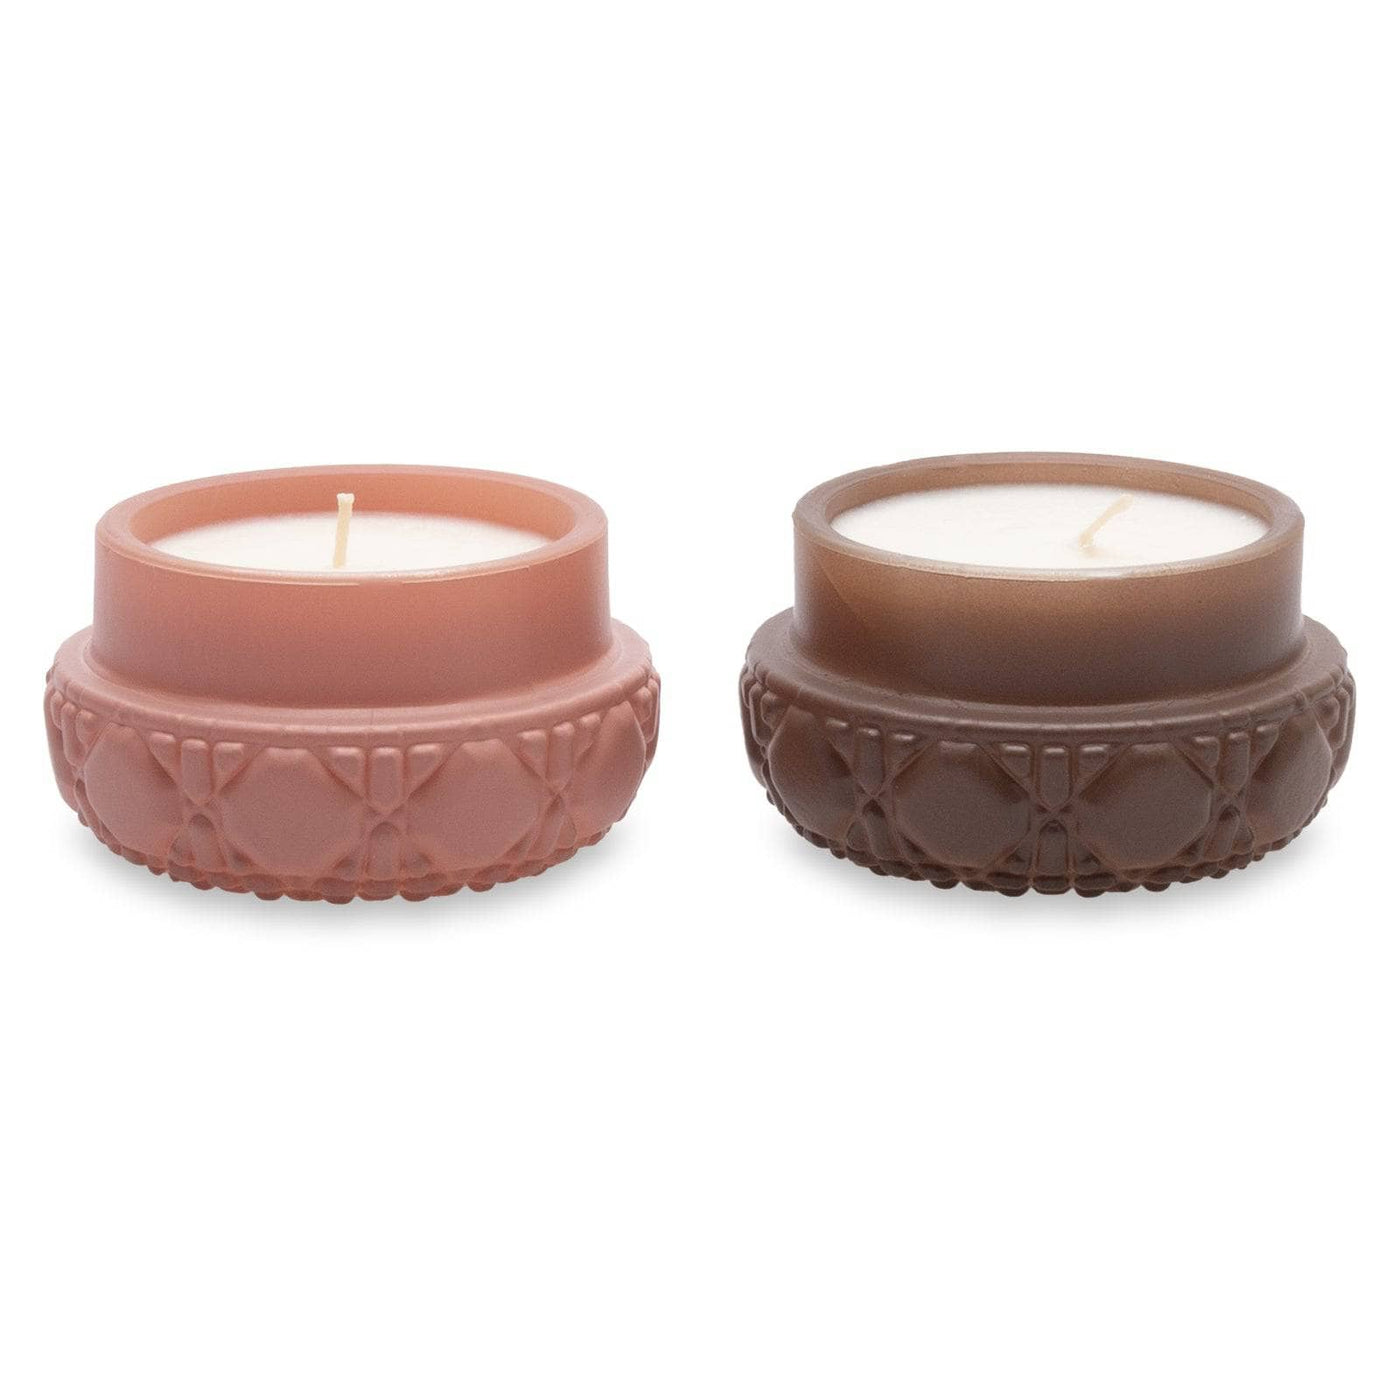 Uplift and Unwind Set of 2 Mini Soy Wax Candles, 50 g each Candles sazy.com